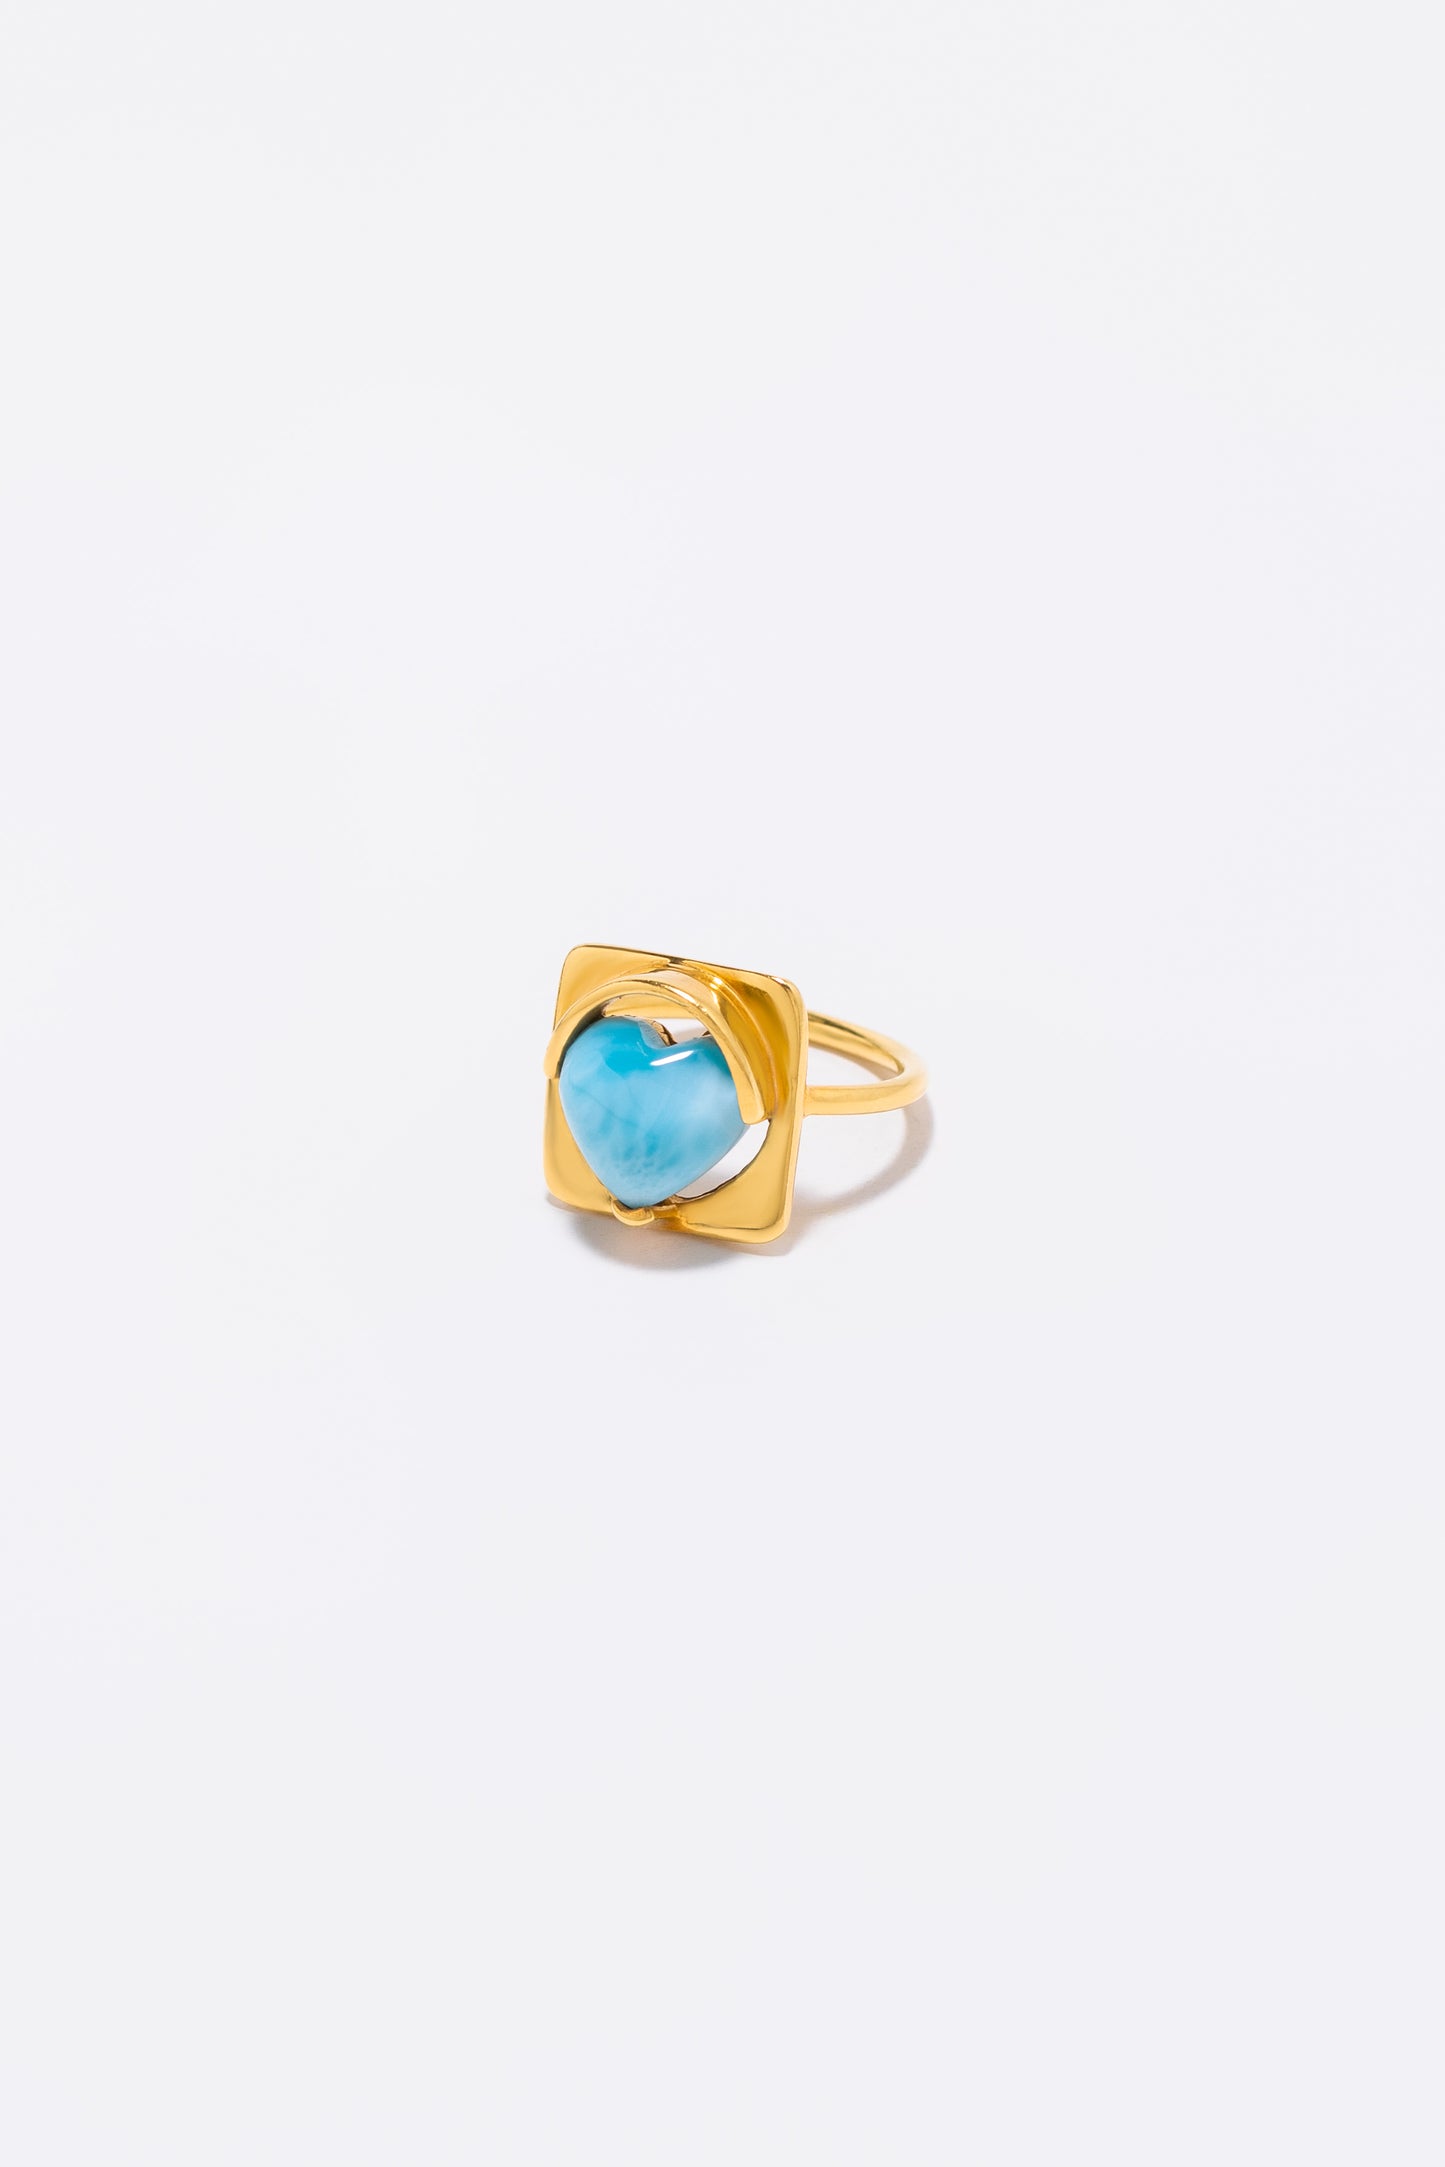 Drive To The Moon - Larimar